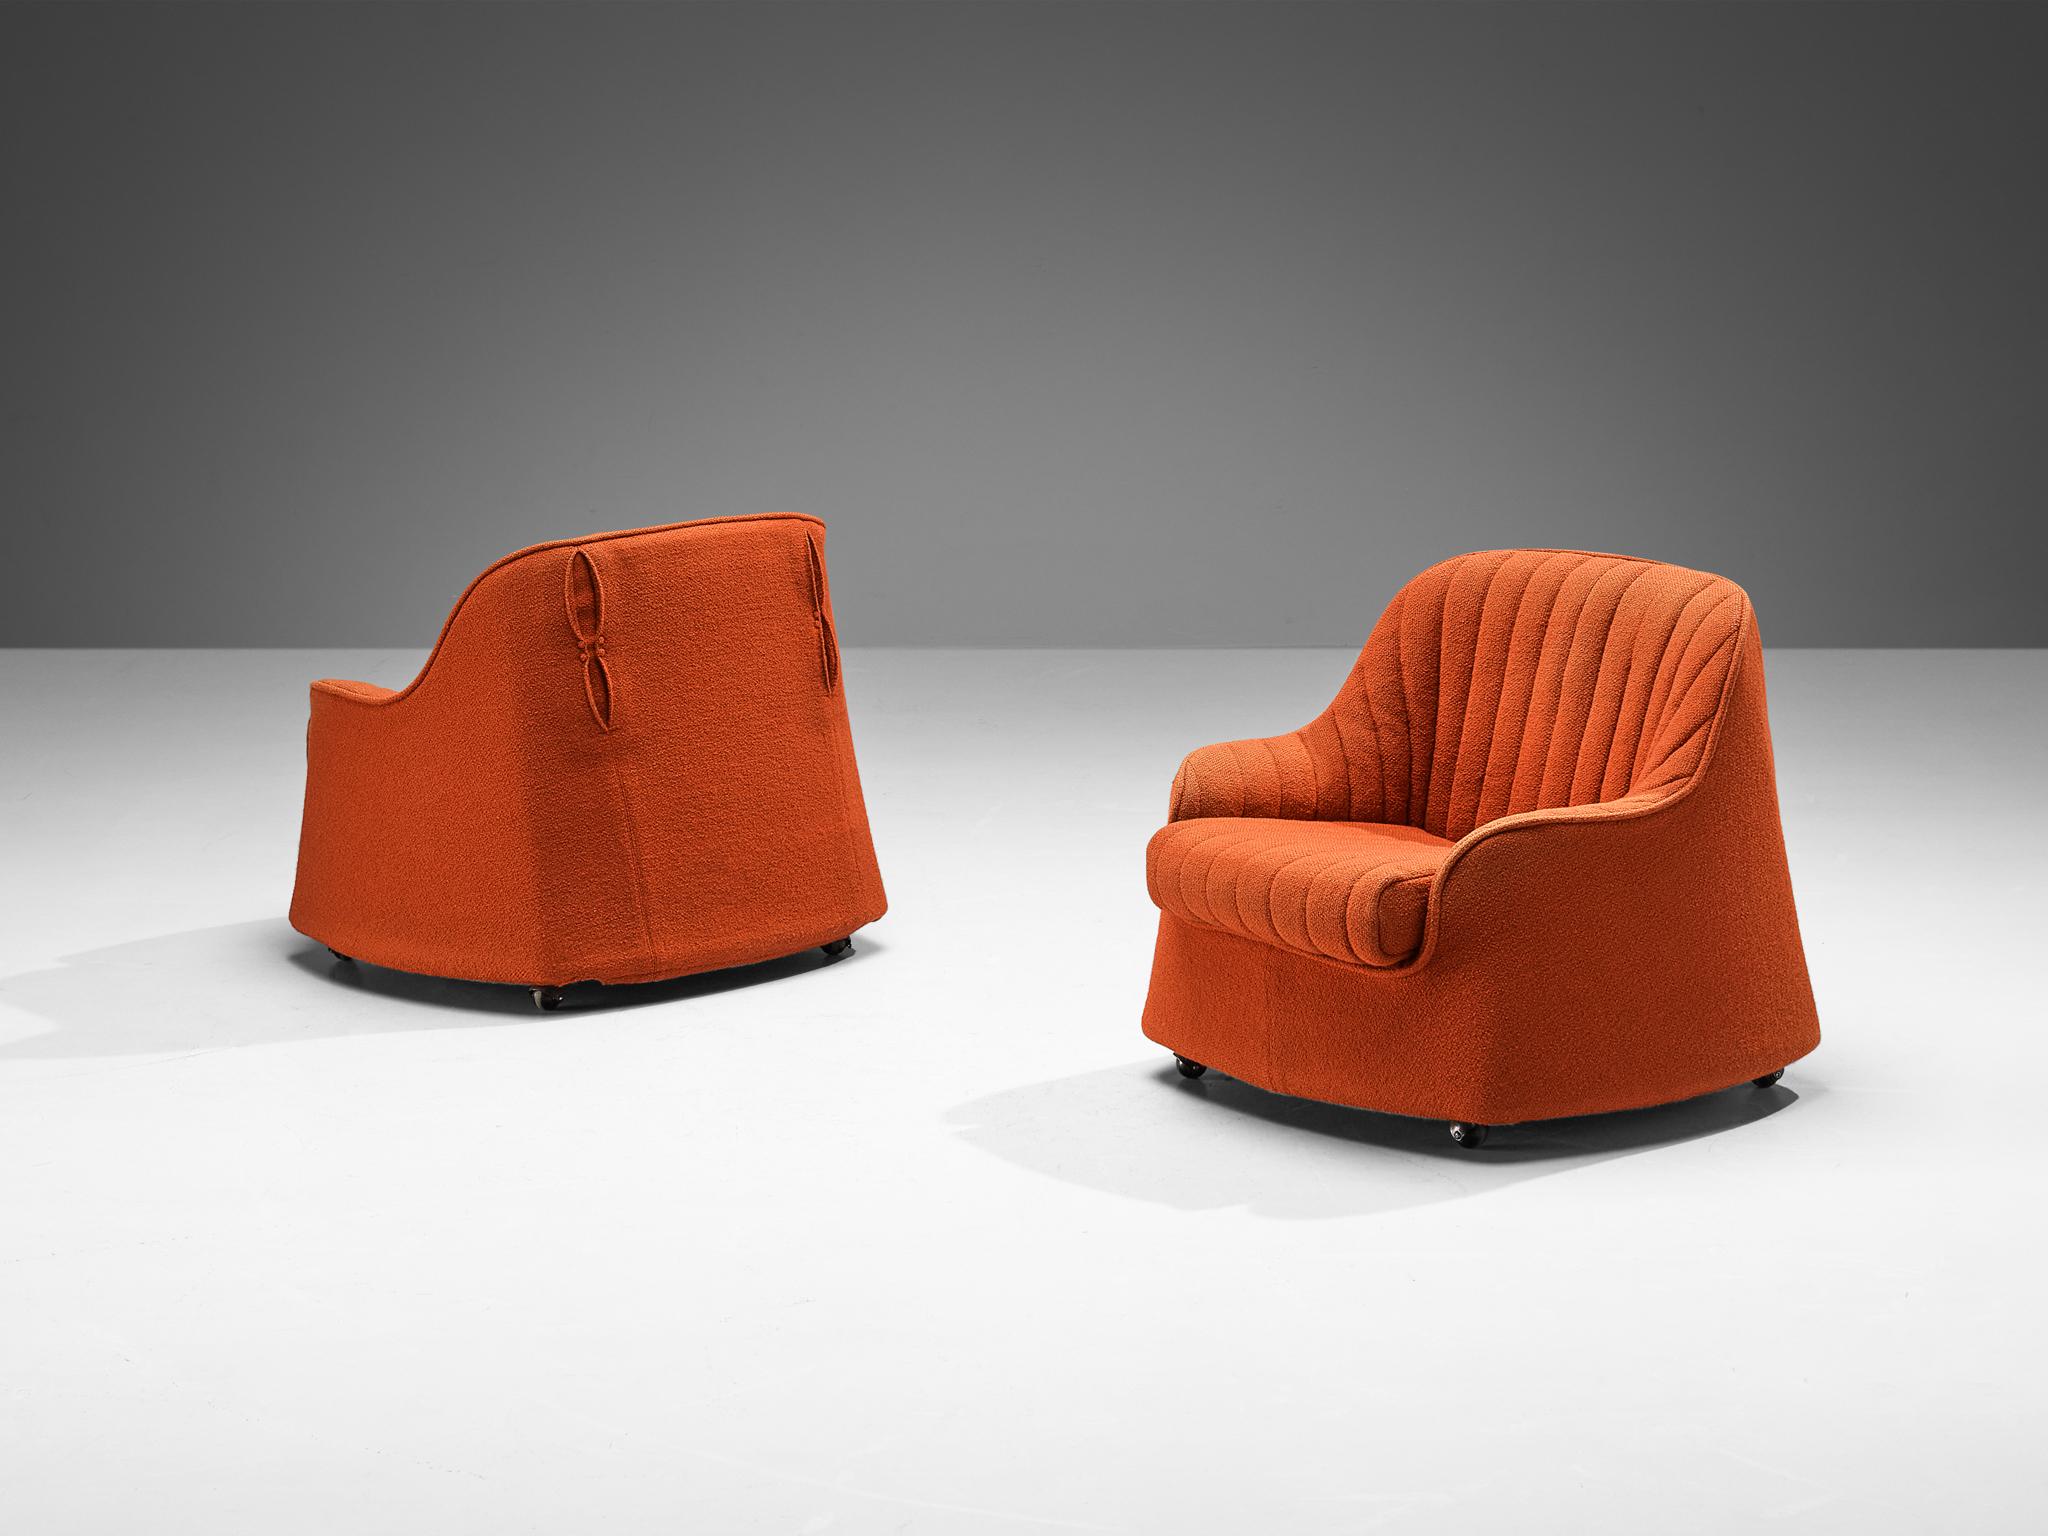 Afra & Tobia Scarpa for Cassina, pair of 'Ciprea' easy chairs, fabric, Italy, 1968 

This design is made possible by the creative and innovative thinking of the Italian designer duo Afra & Tobia Scarpa. The layout is marked by fluid lines and